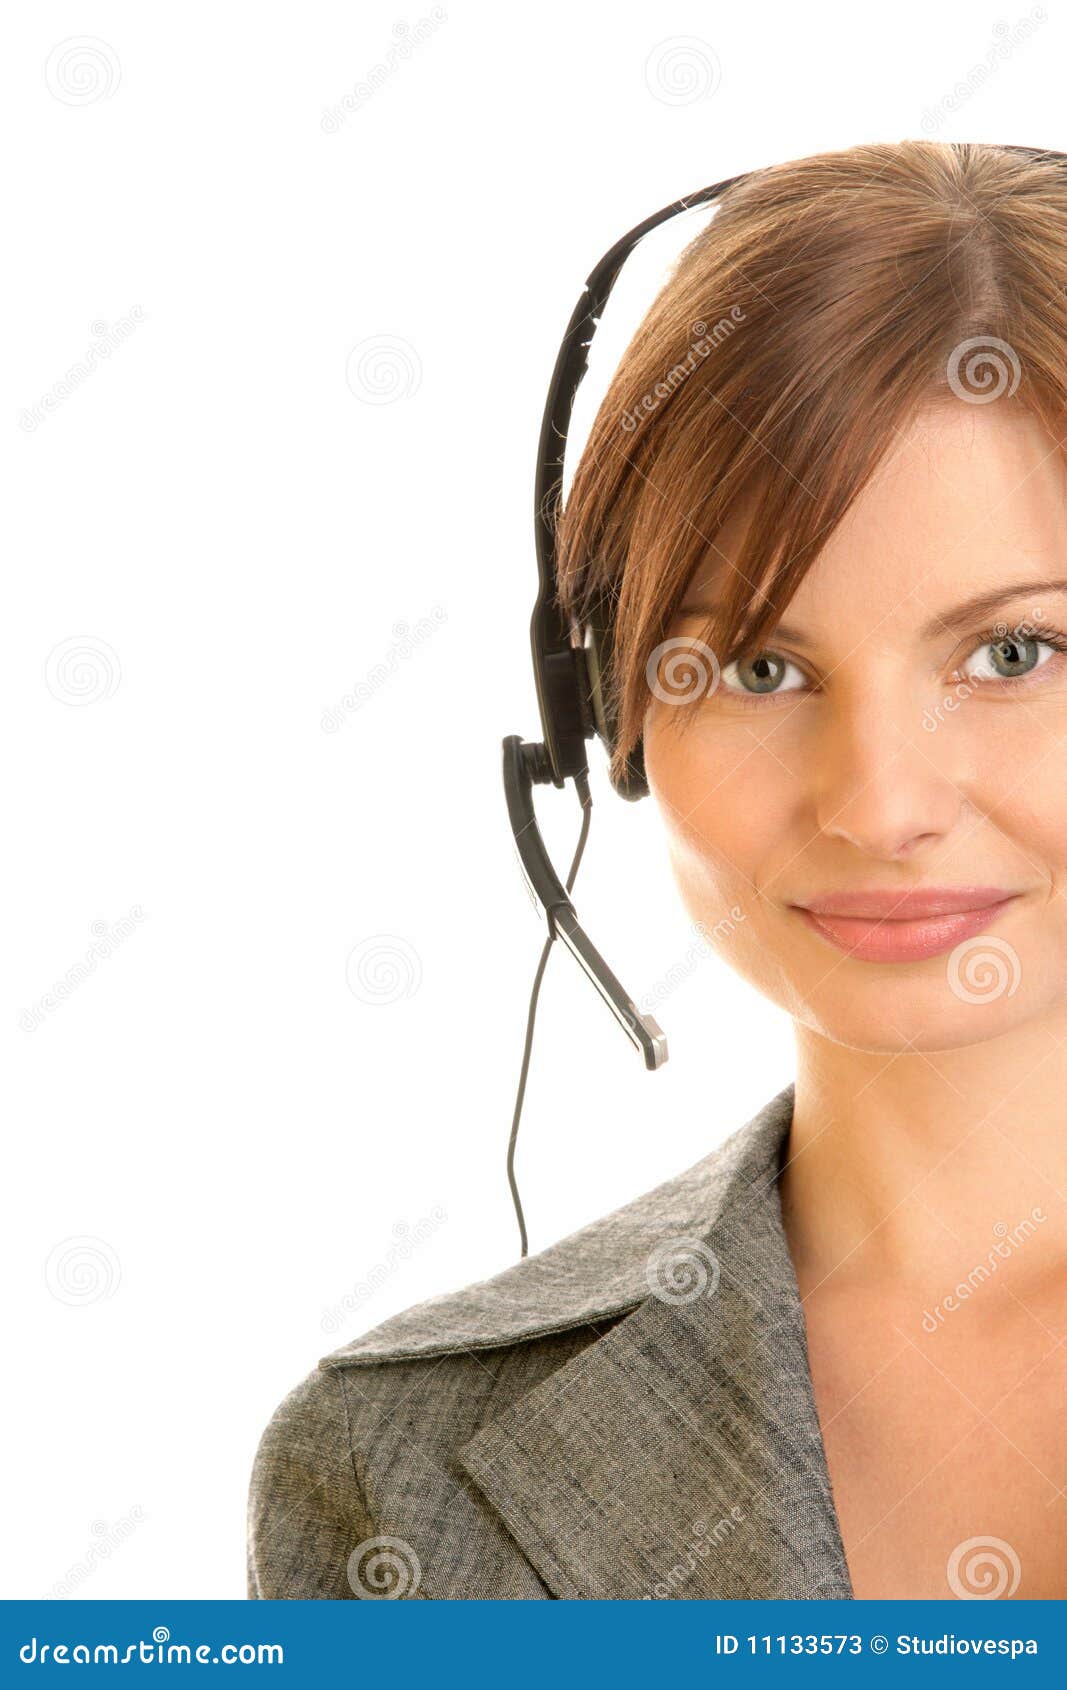 Woman wearing headset. Portrait of friendly secretary/telephone operator wearing headset isolated over white background